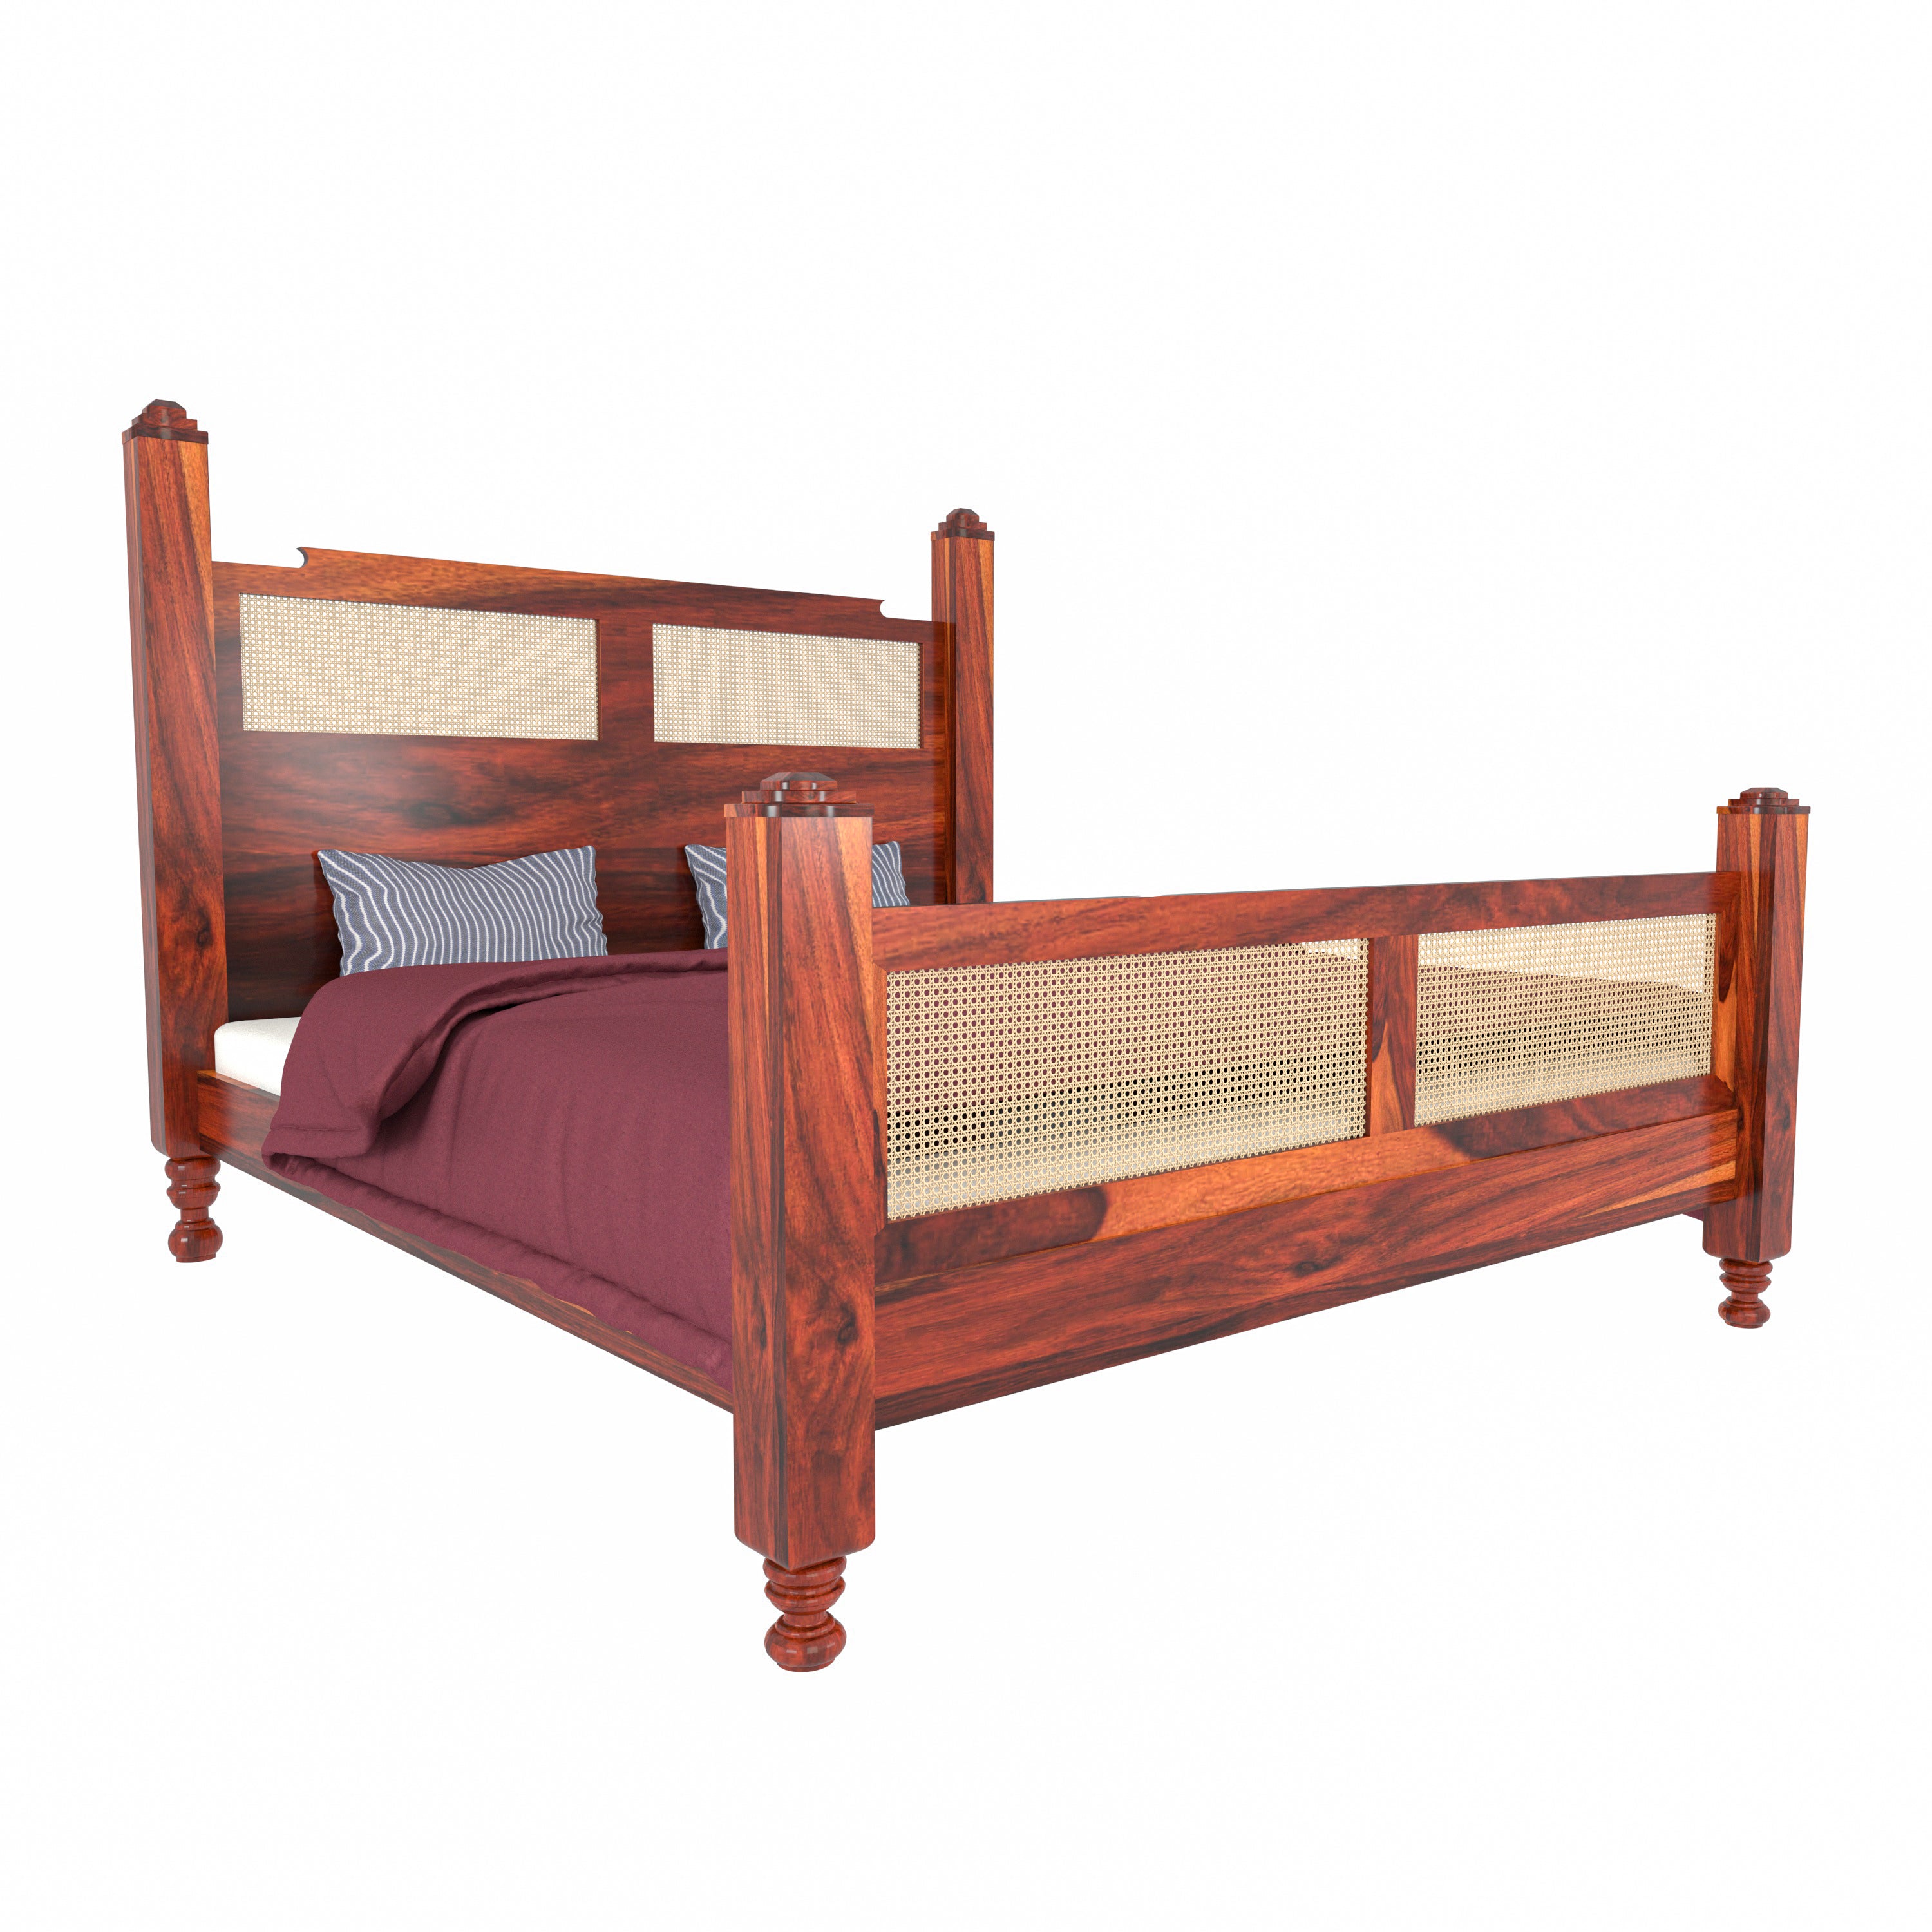 Classic Cane Simple Heritage Style Handmade Wooden Bed with Simple Bedside Bedroom Furniture Sets